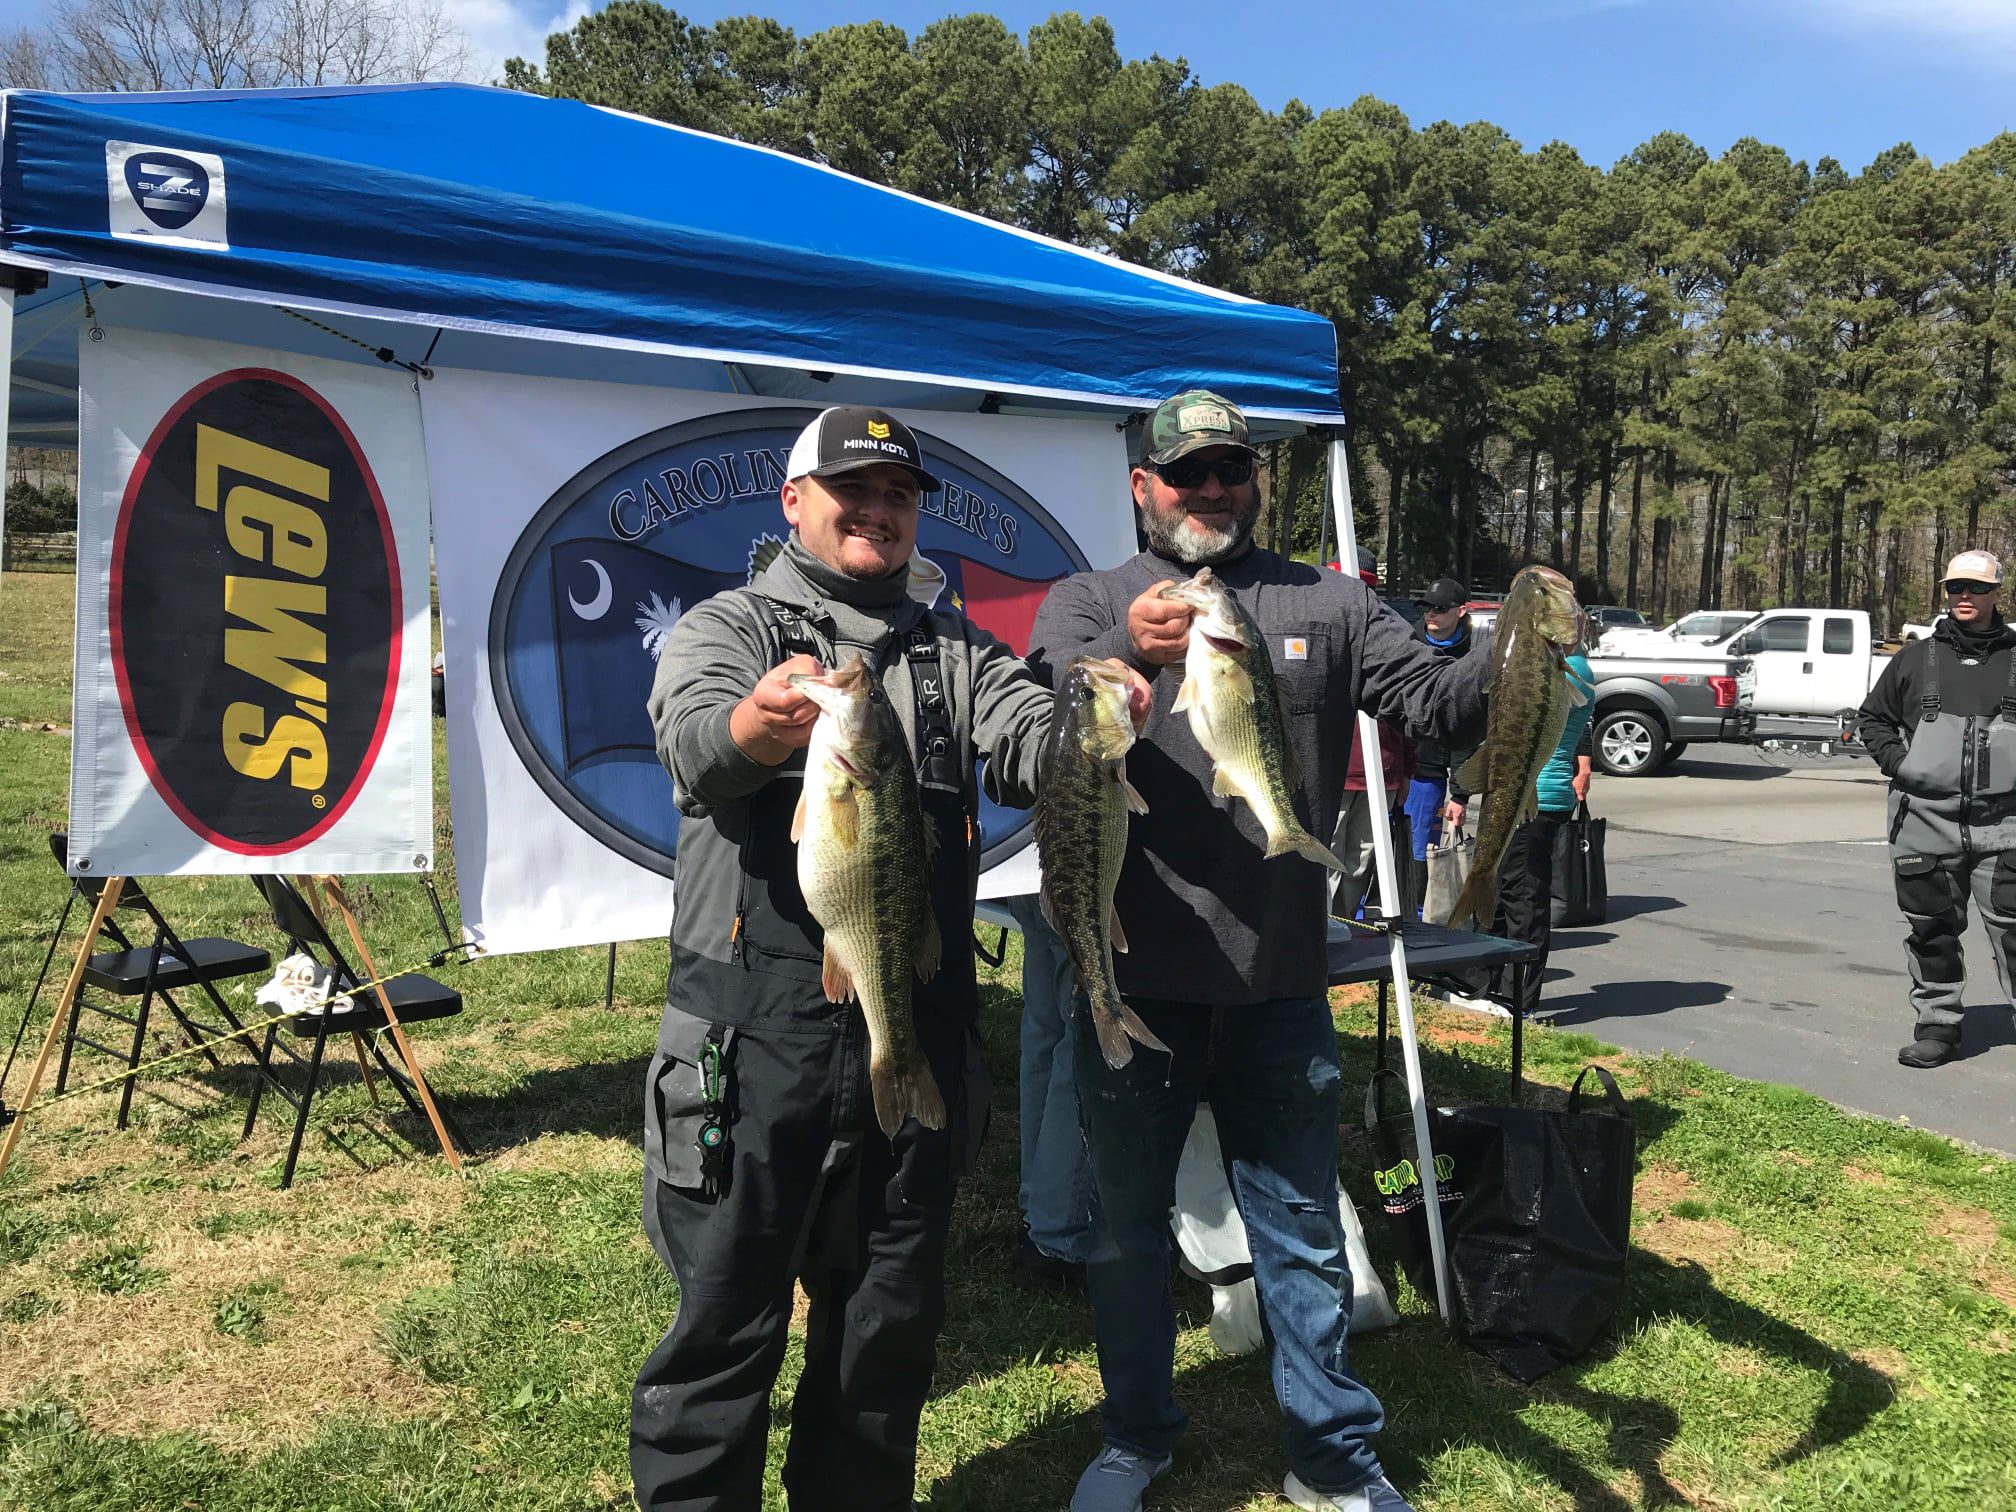 Chris Carnes & Mike Stephens Win CATT Lake Norman, NC Open March 20, 201